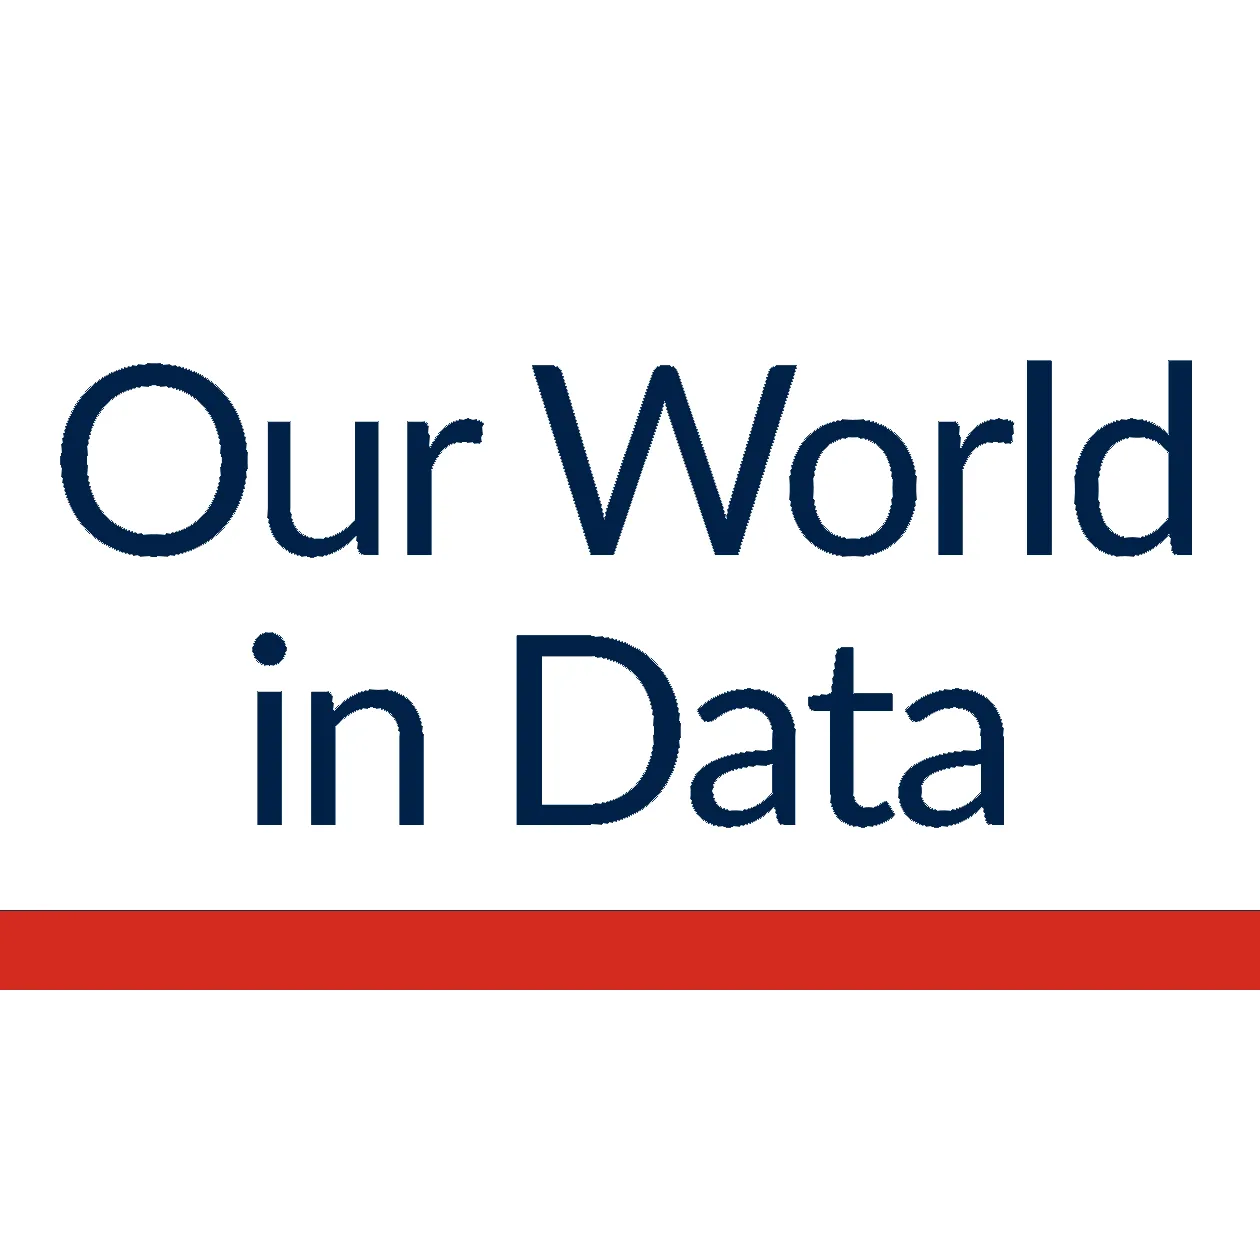 Our World in Data